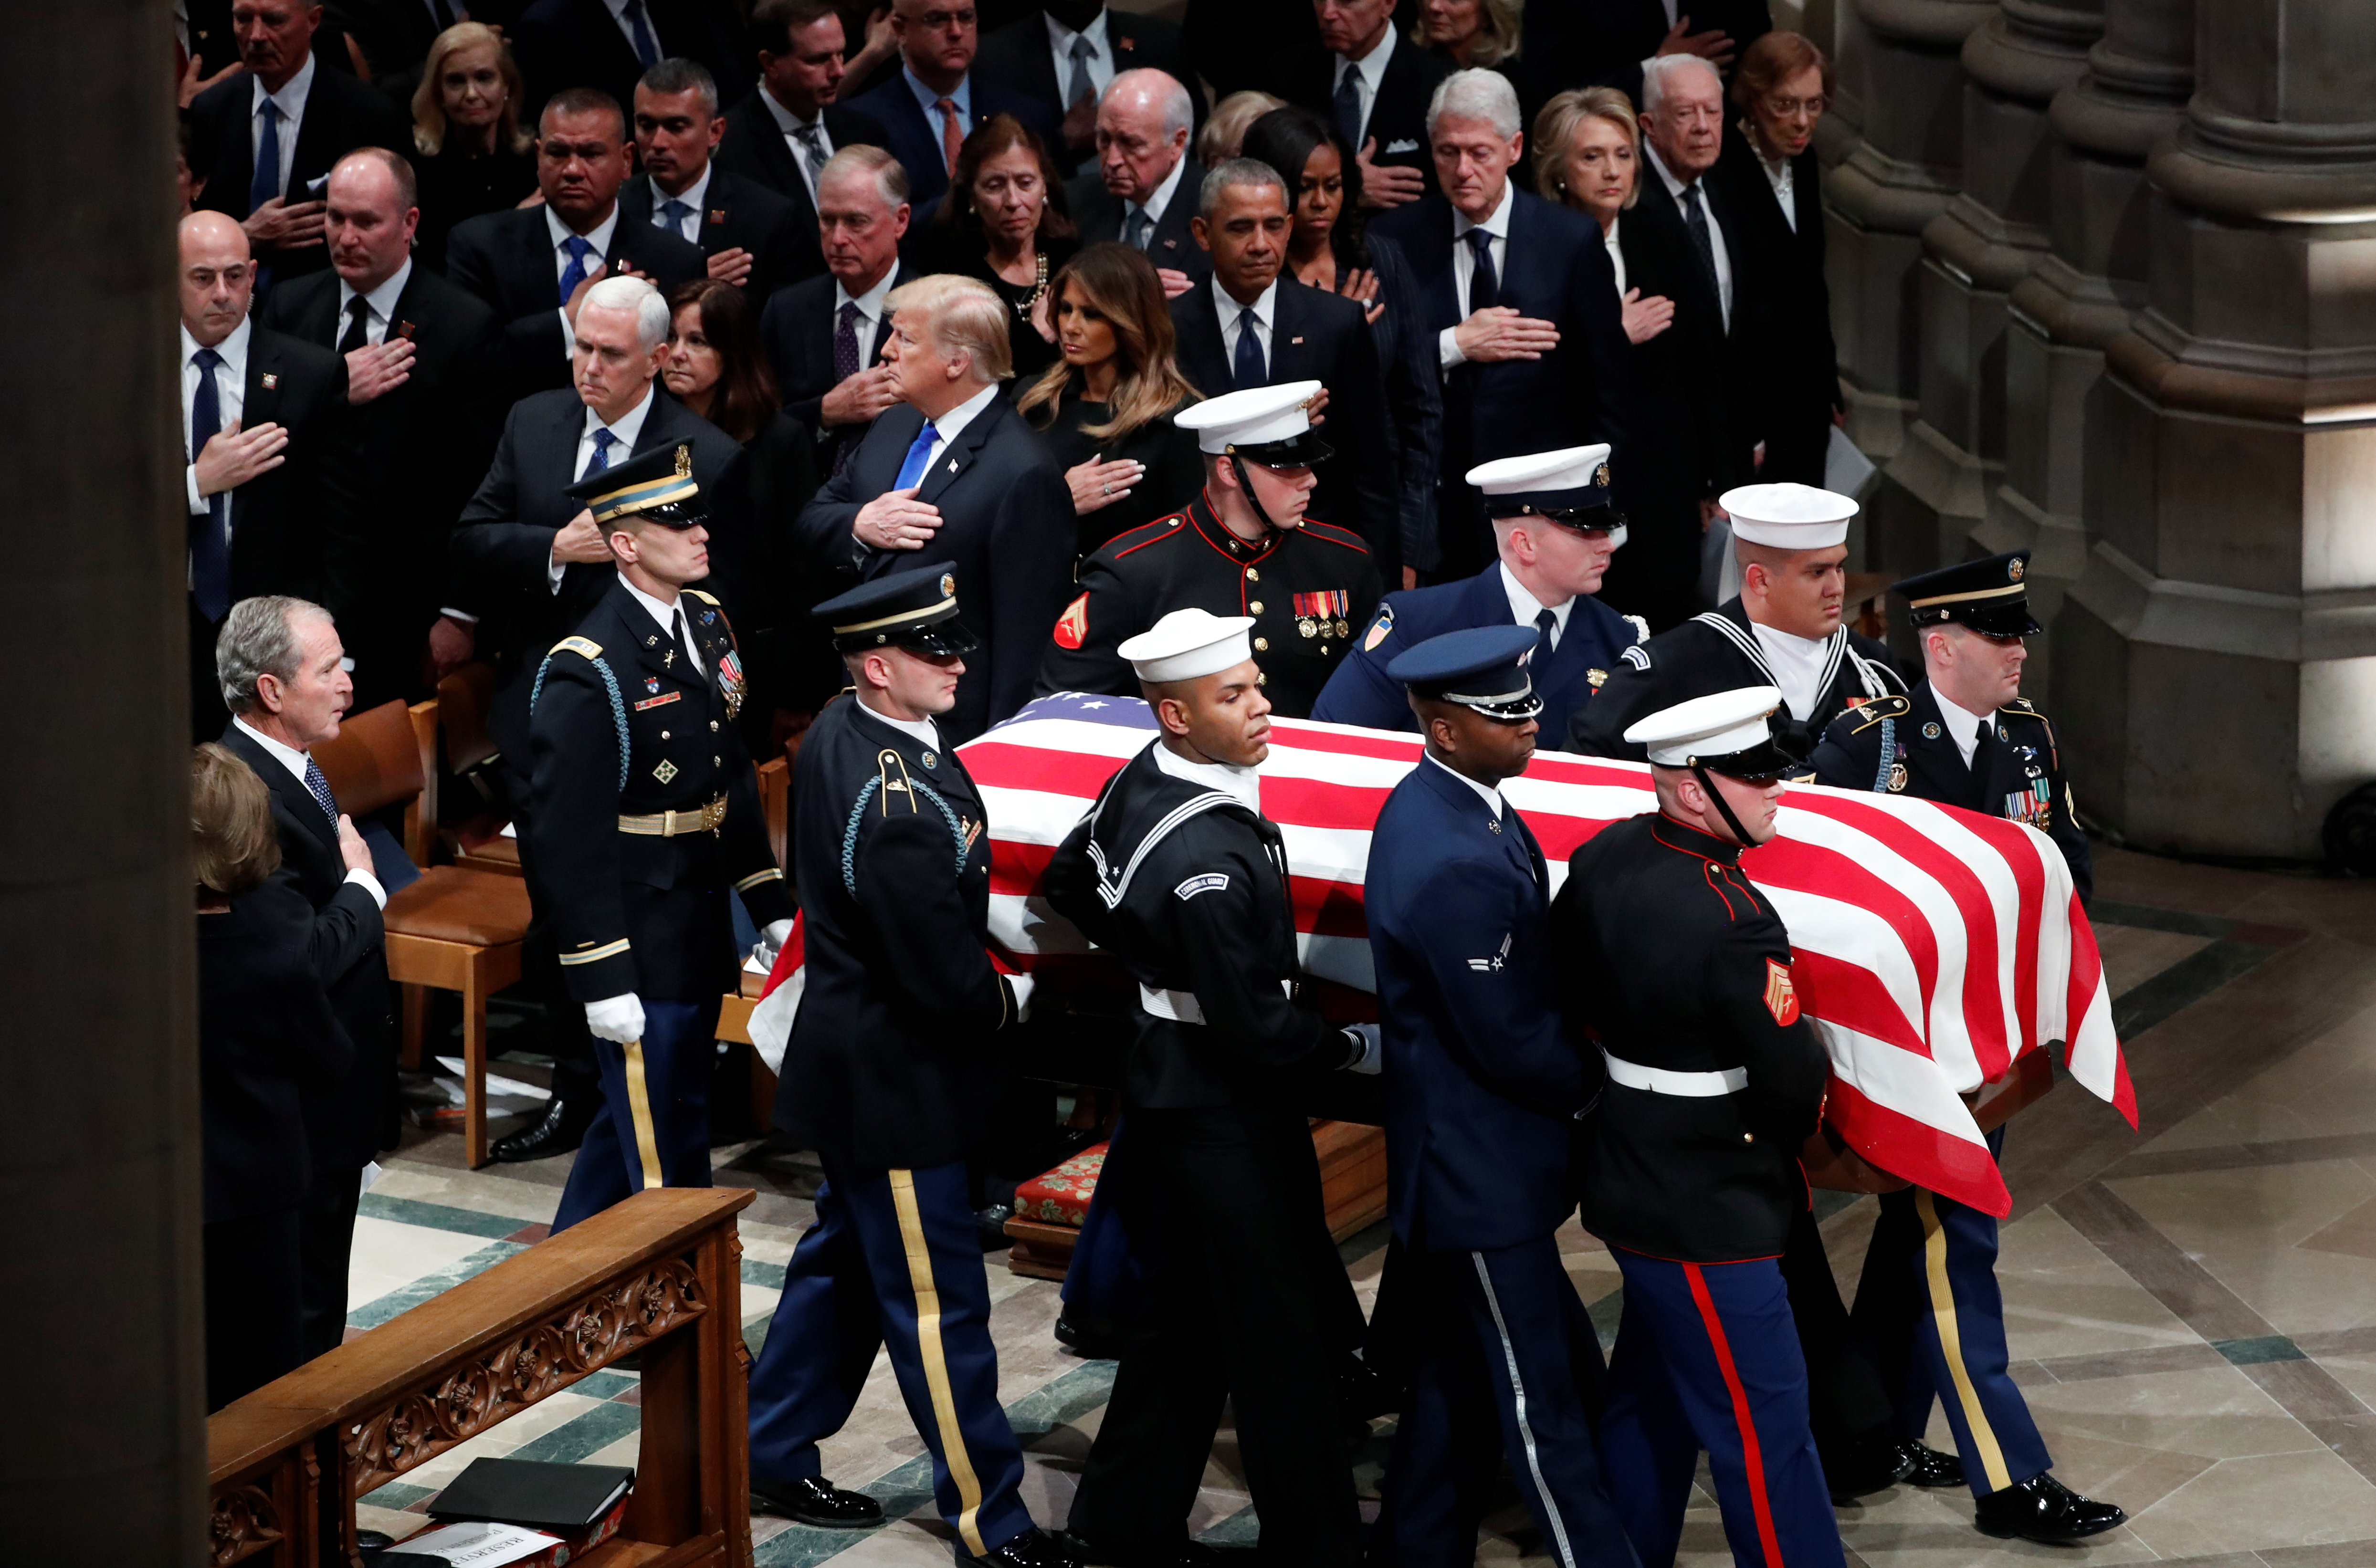 The flag-draped casket of former U.S. President George H.W. Bush is carried by military pallbearers past his son former President George W. Bush (L), U.S. President Donald Trump, first lady Melania Trump, former President Barack Obama, former first lady Michelle Obama, former President Bill Clinton, former first lady Hillary Clinton, former President Jimmy Carter and former first lady Rosalynn Carter as it arrives at his state funeral at Washington National Cathedral in Washington, U.S., December 5, 2018. REUTERS/Kevin Lamarque